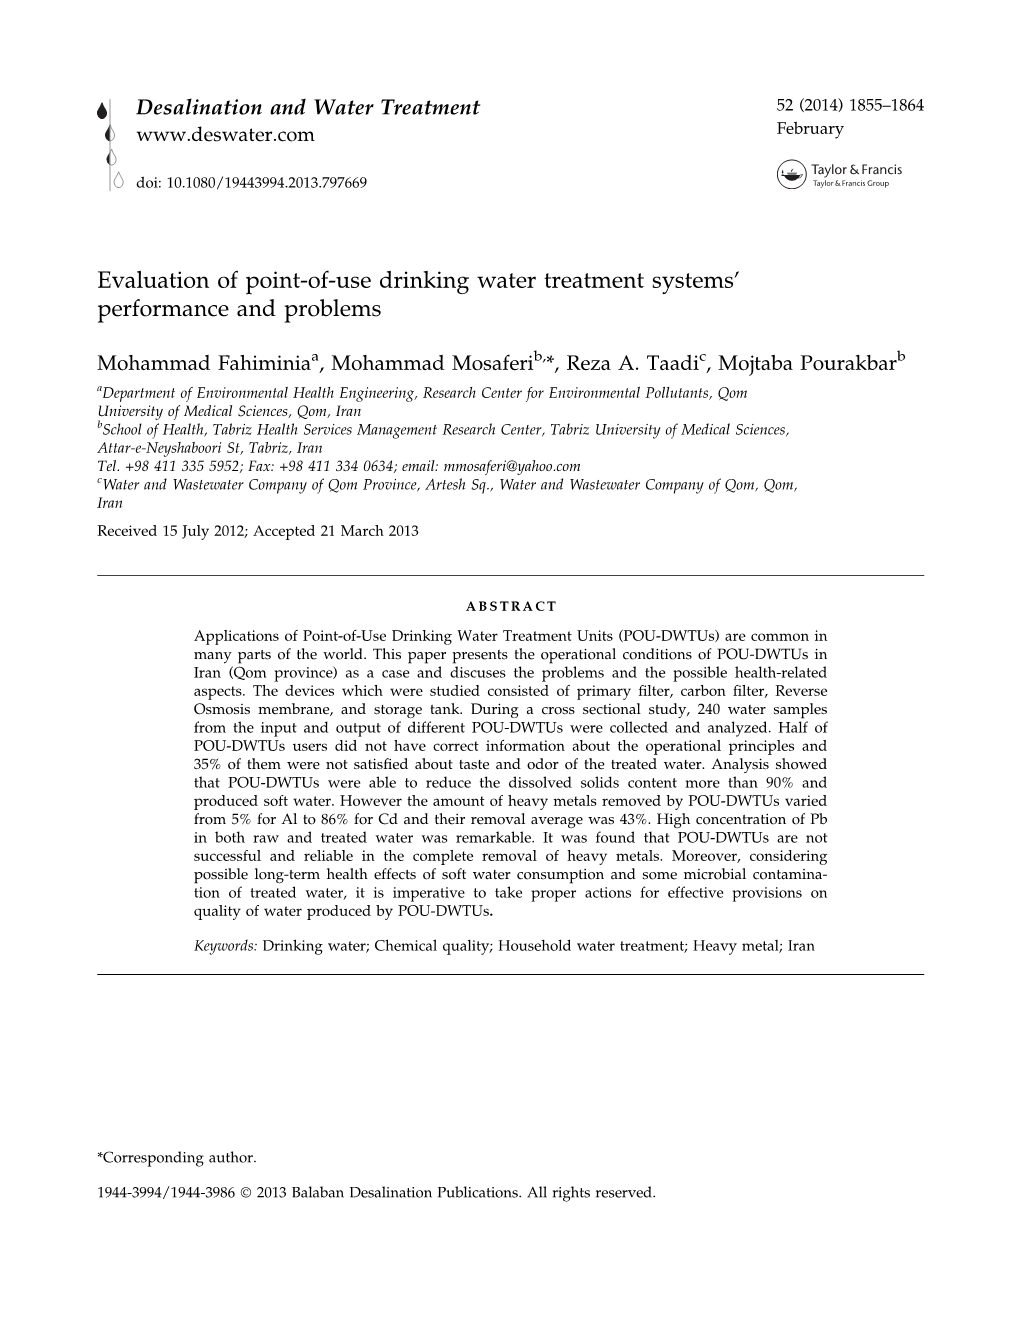 Evaluation of Point-Of-Use Drinking Water Treatment Systems’ Performance and Problems